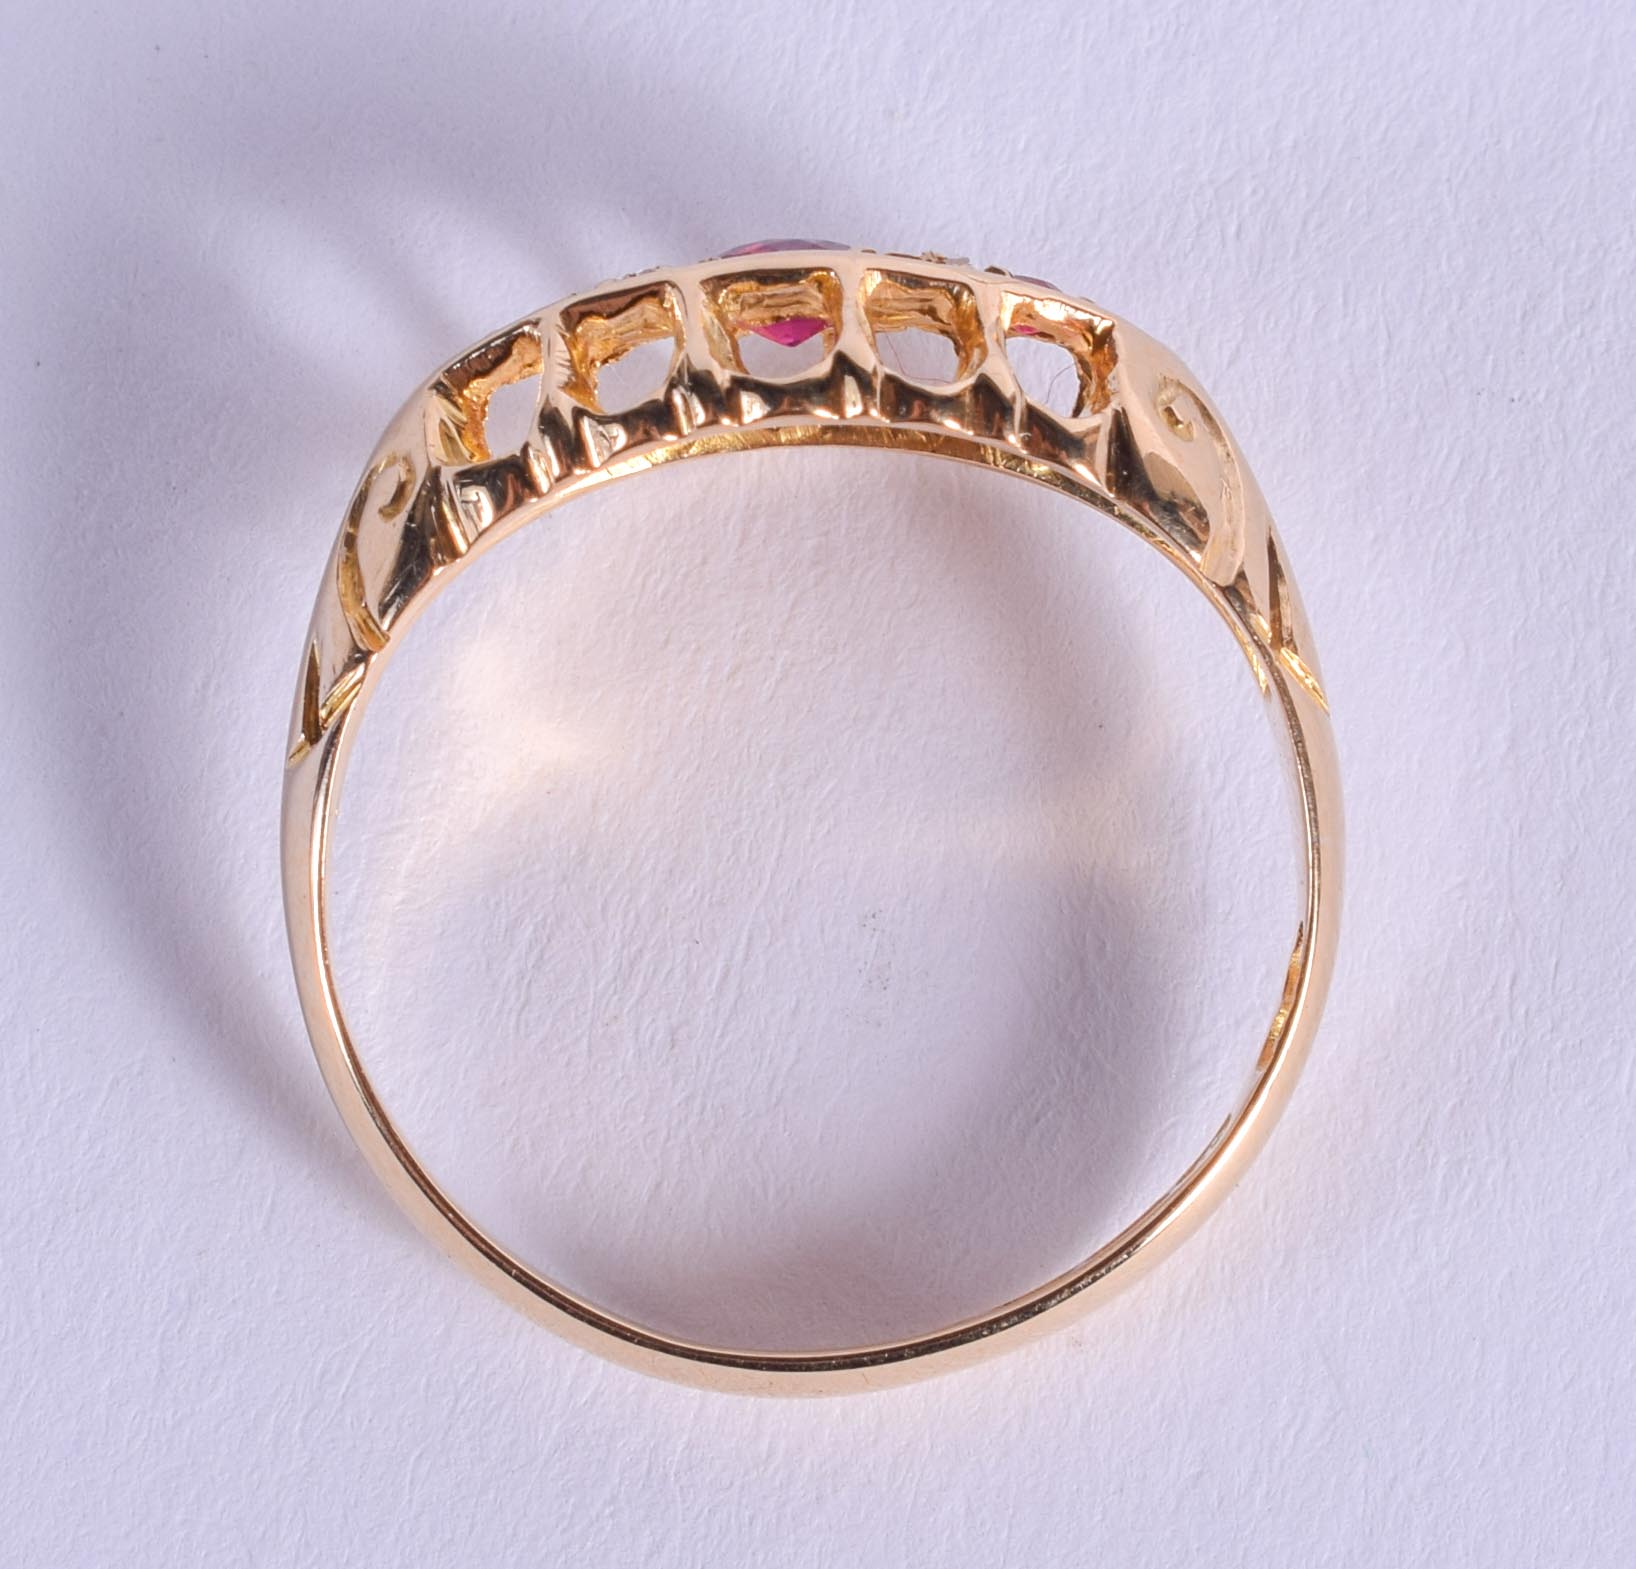 AN 18CT GOLD AND RUBY RING. K. 2.4 grams. - Image 2 of 2